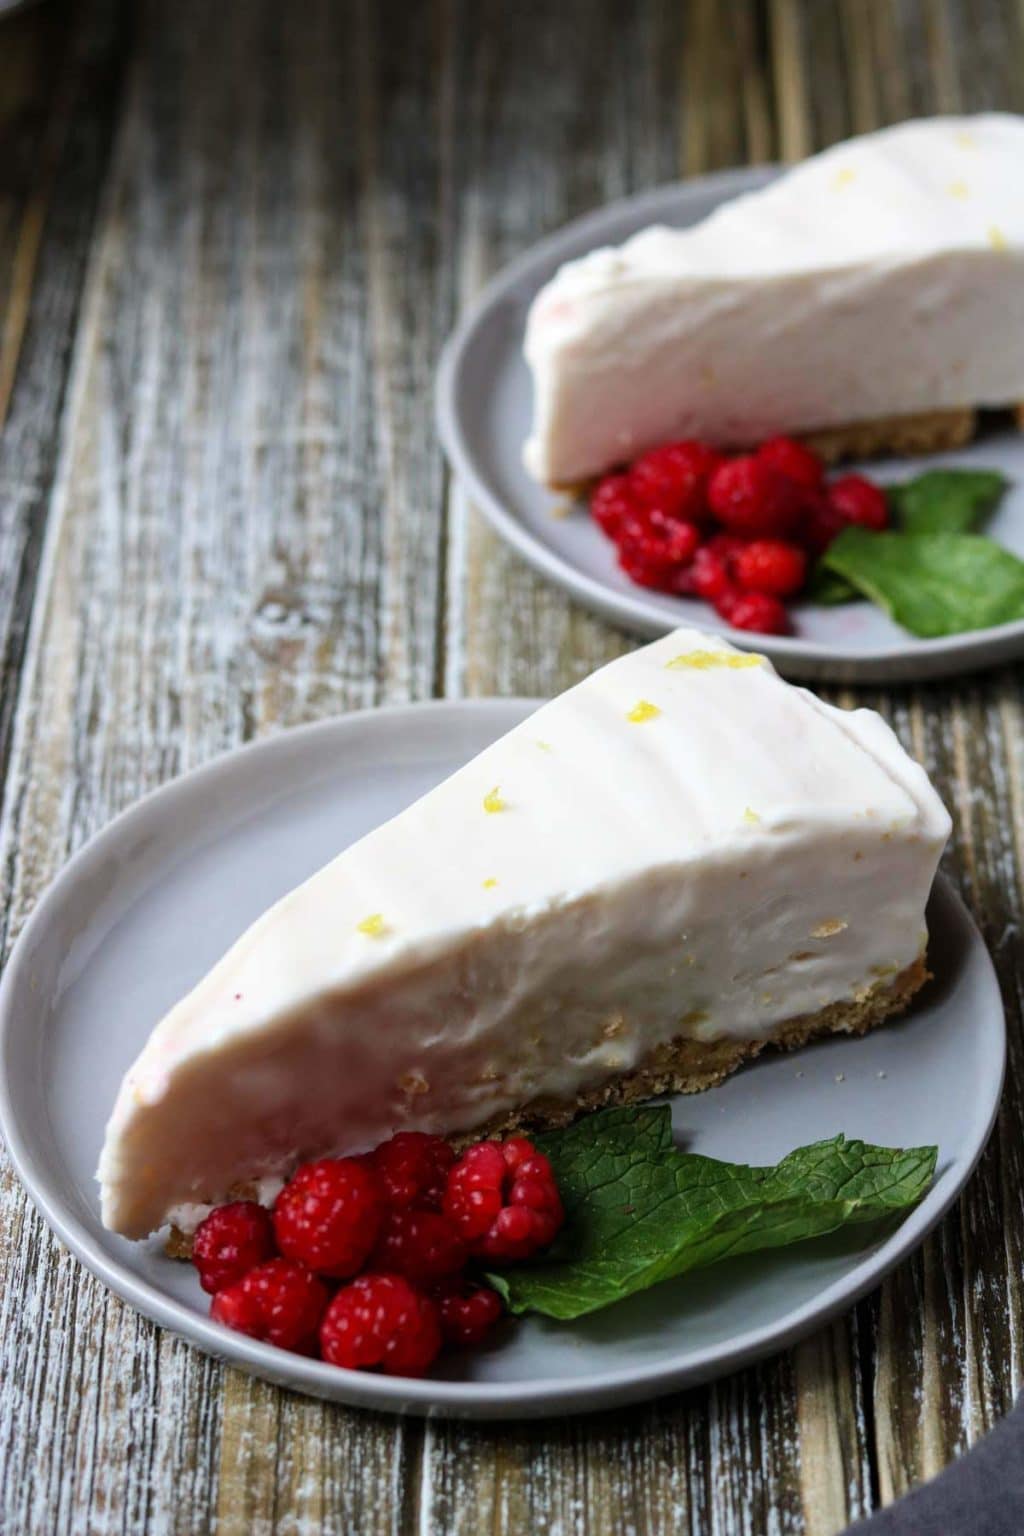 Two slices of Raspberry Lemonade Icebox Pie garnished with fresh raspberries and mint leaves